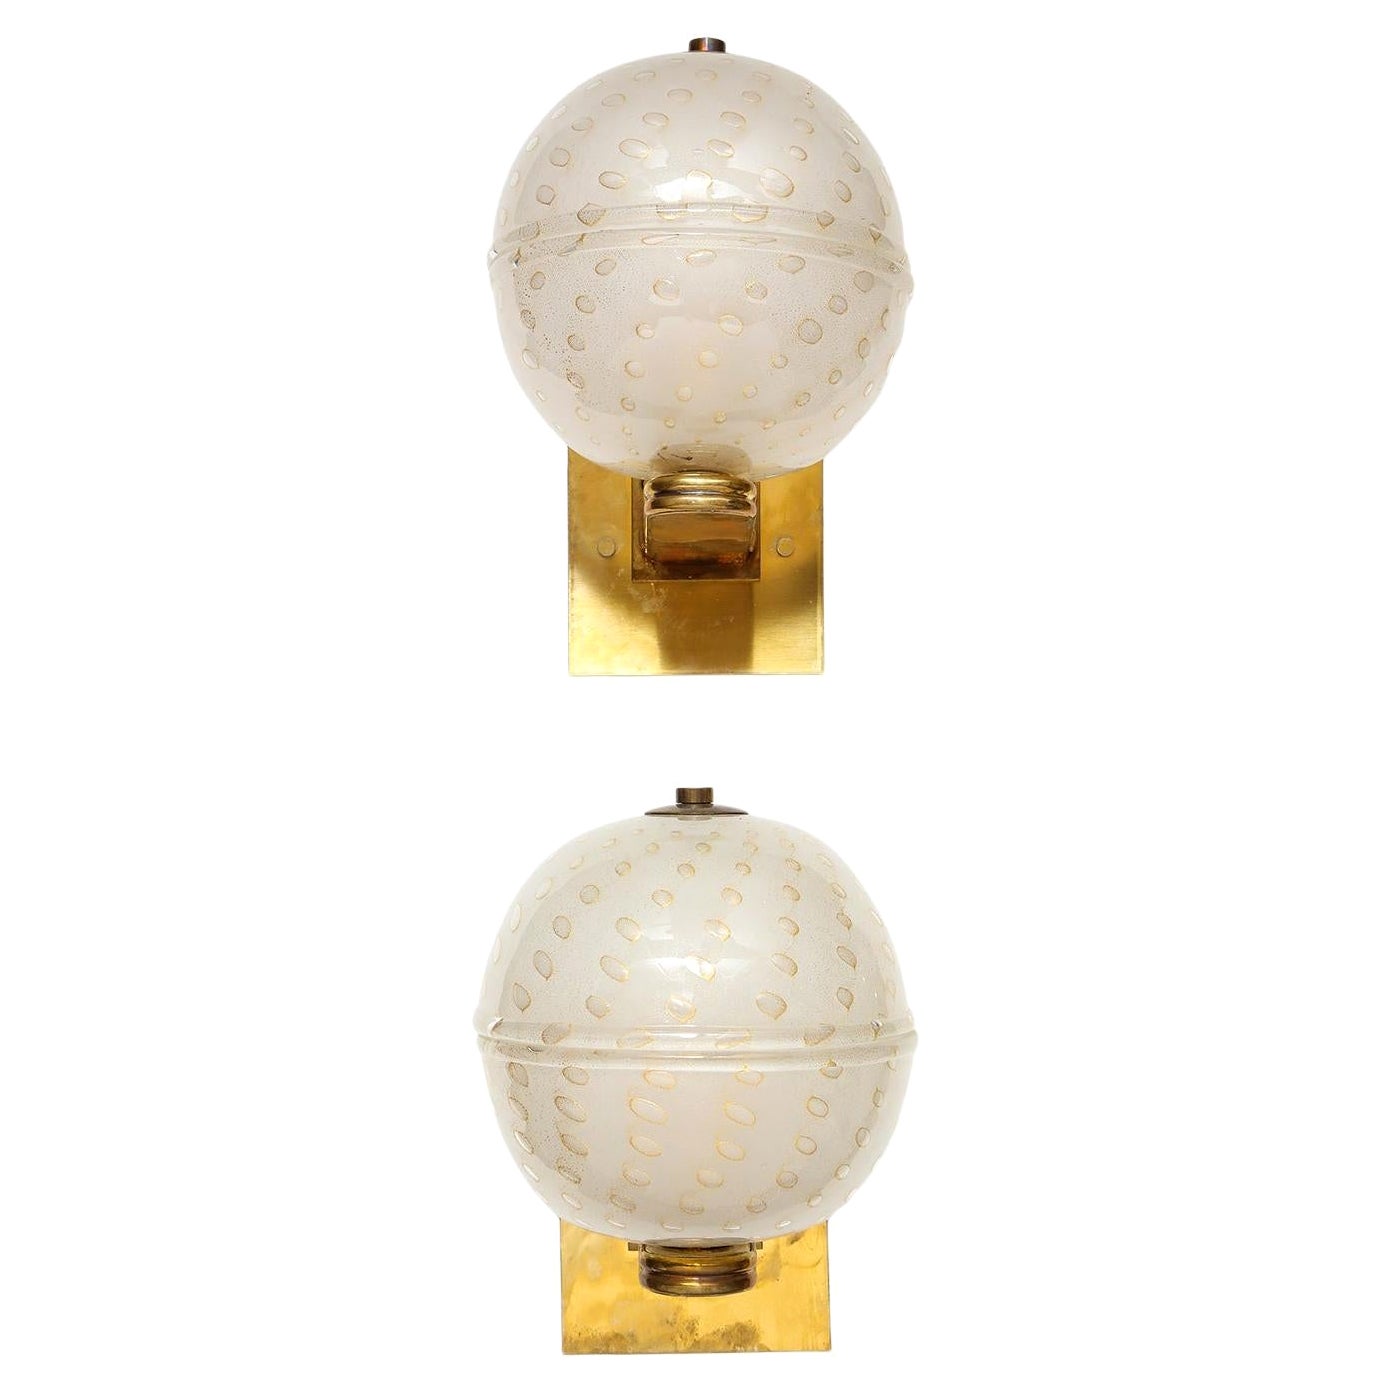 Pair of Custom Handcrafted Murano Glass Sphere-Shaped Sconces